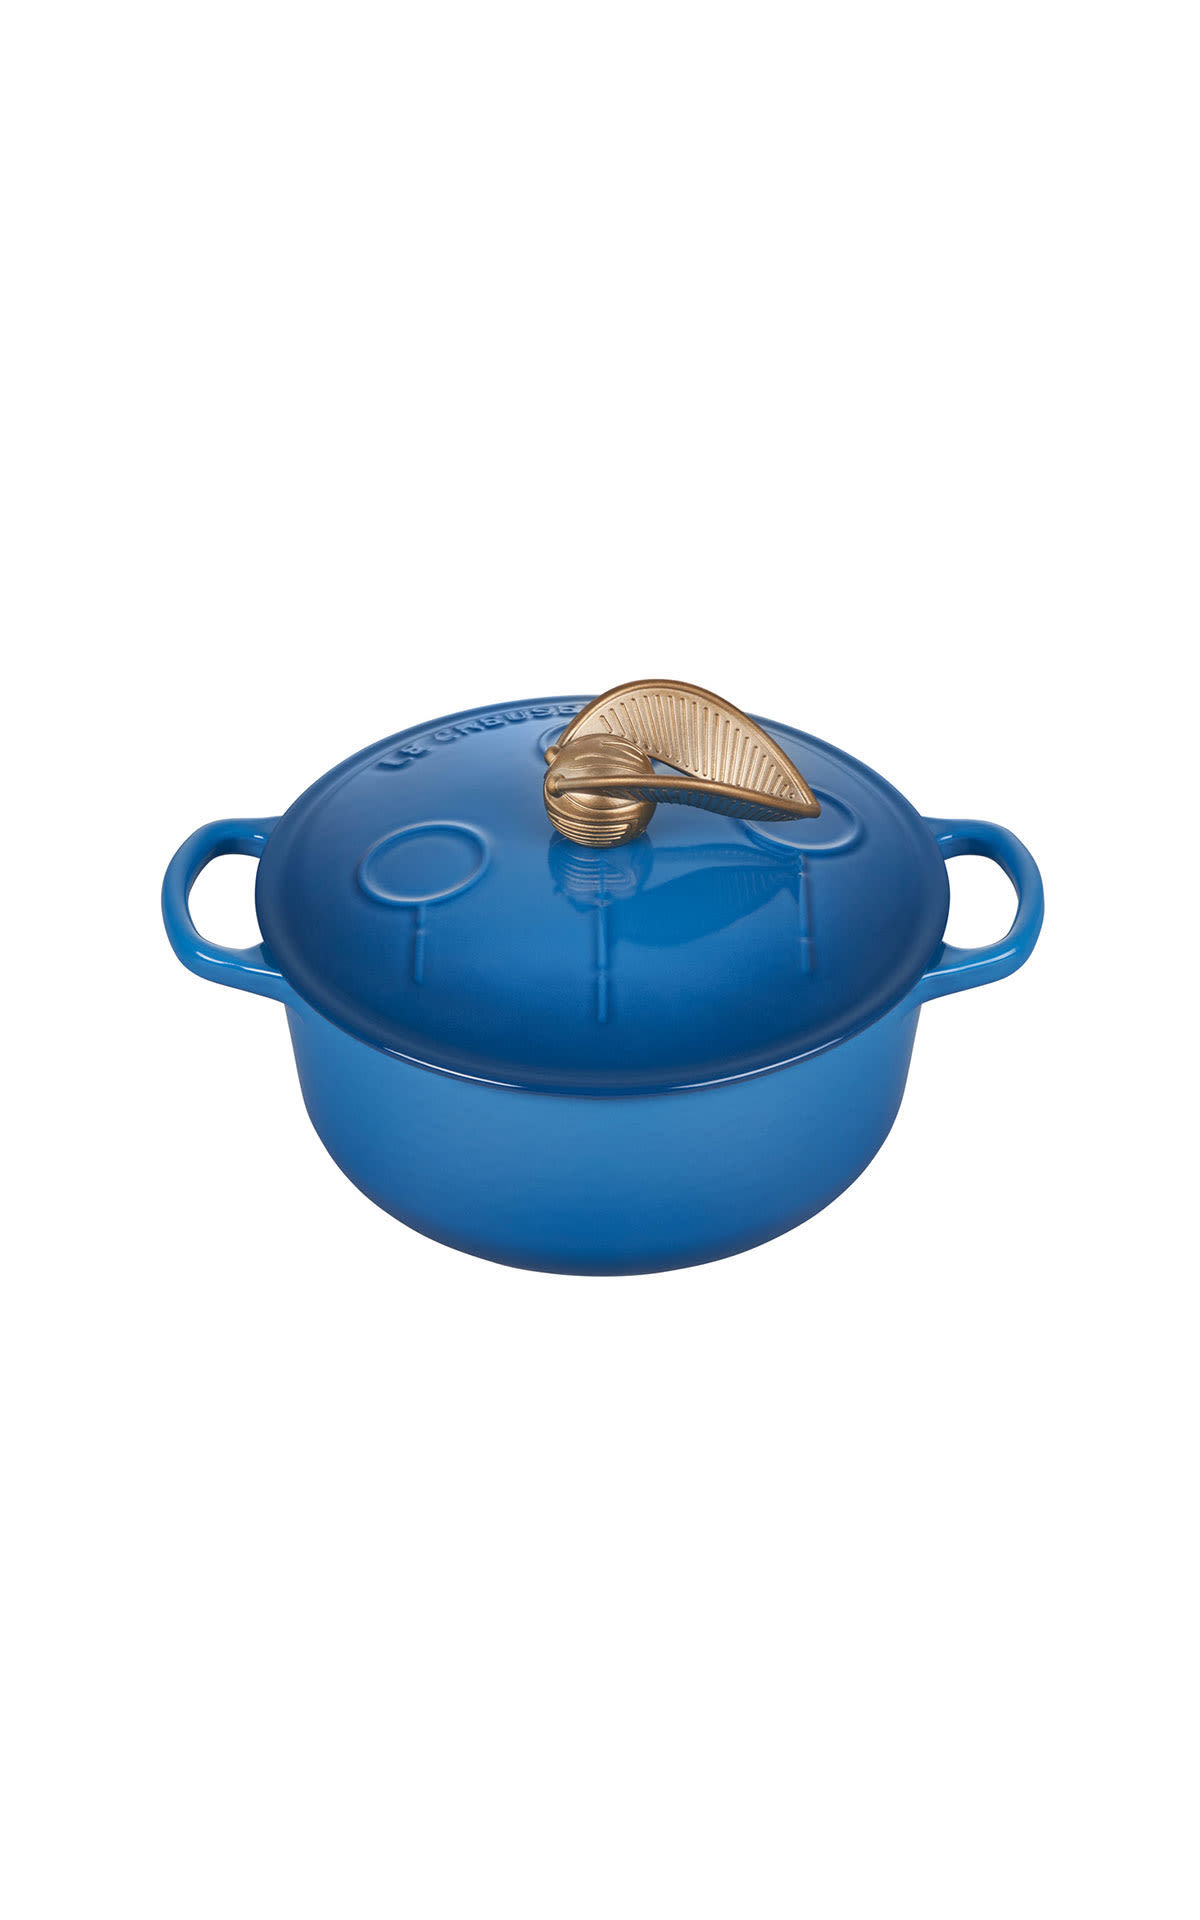 Le Creuset Harry Potter 22cm casserole blue with quidditch knob from Bicester Village